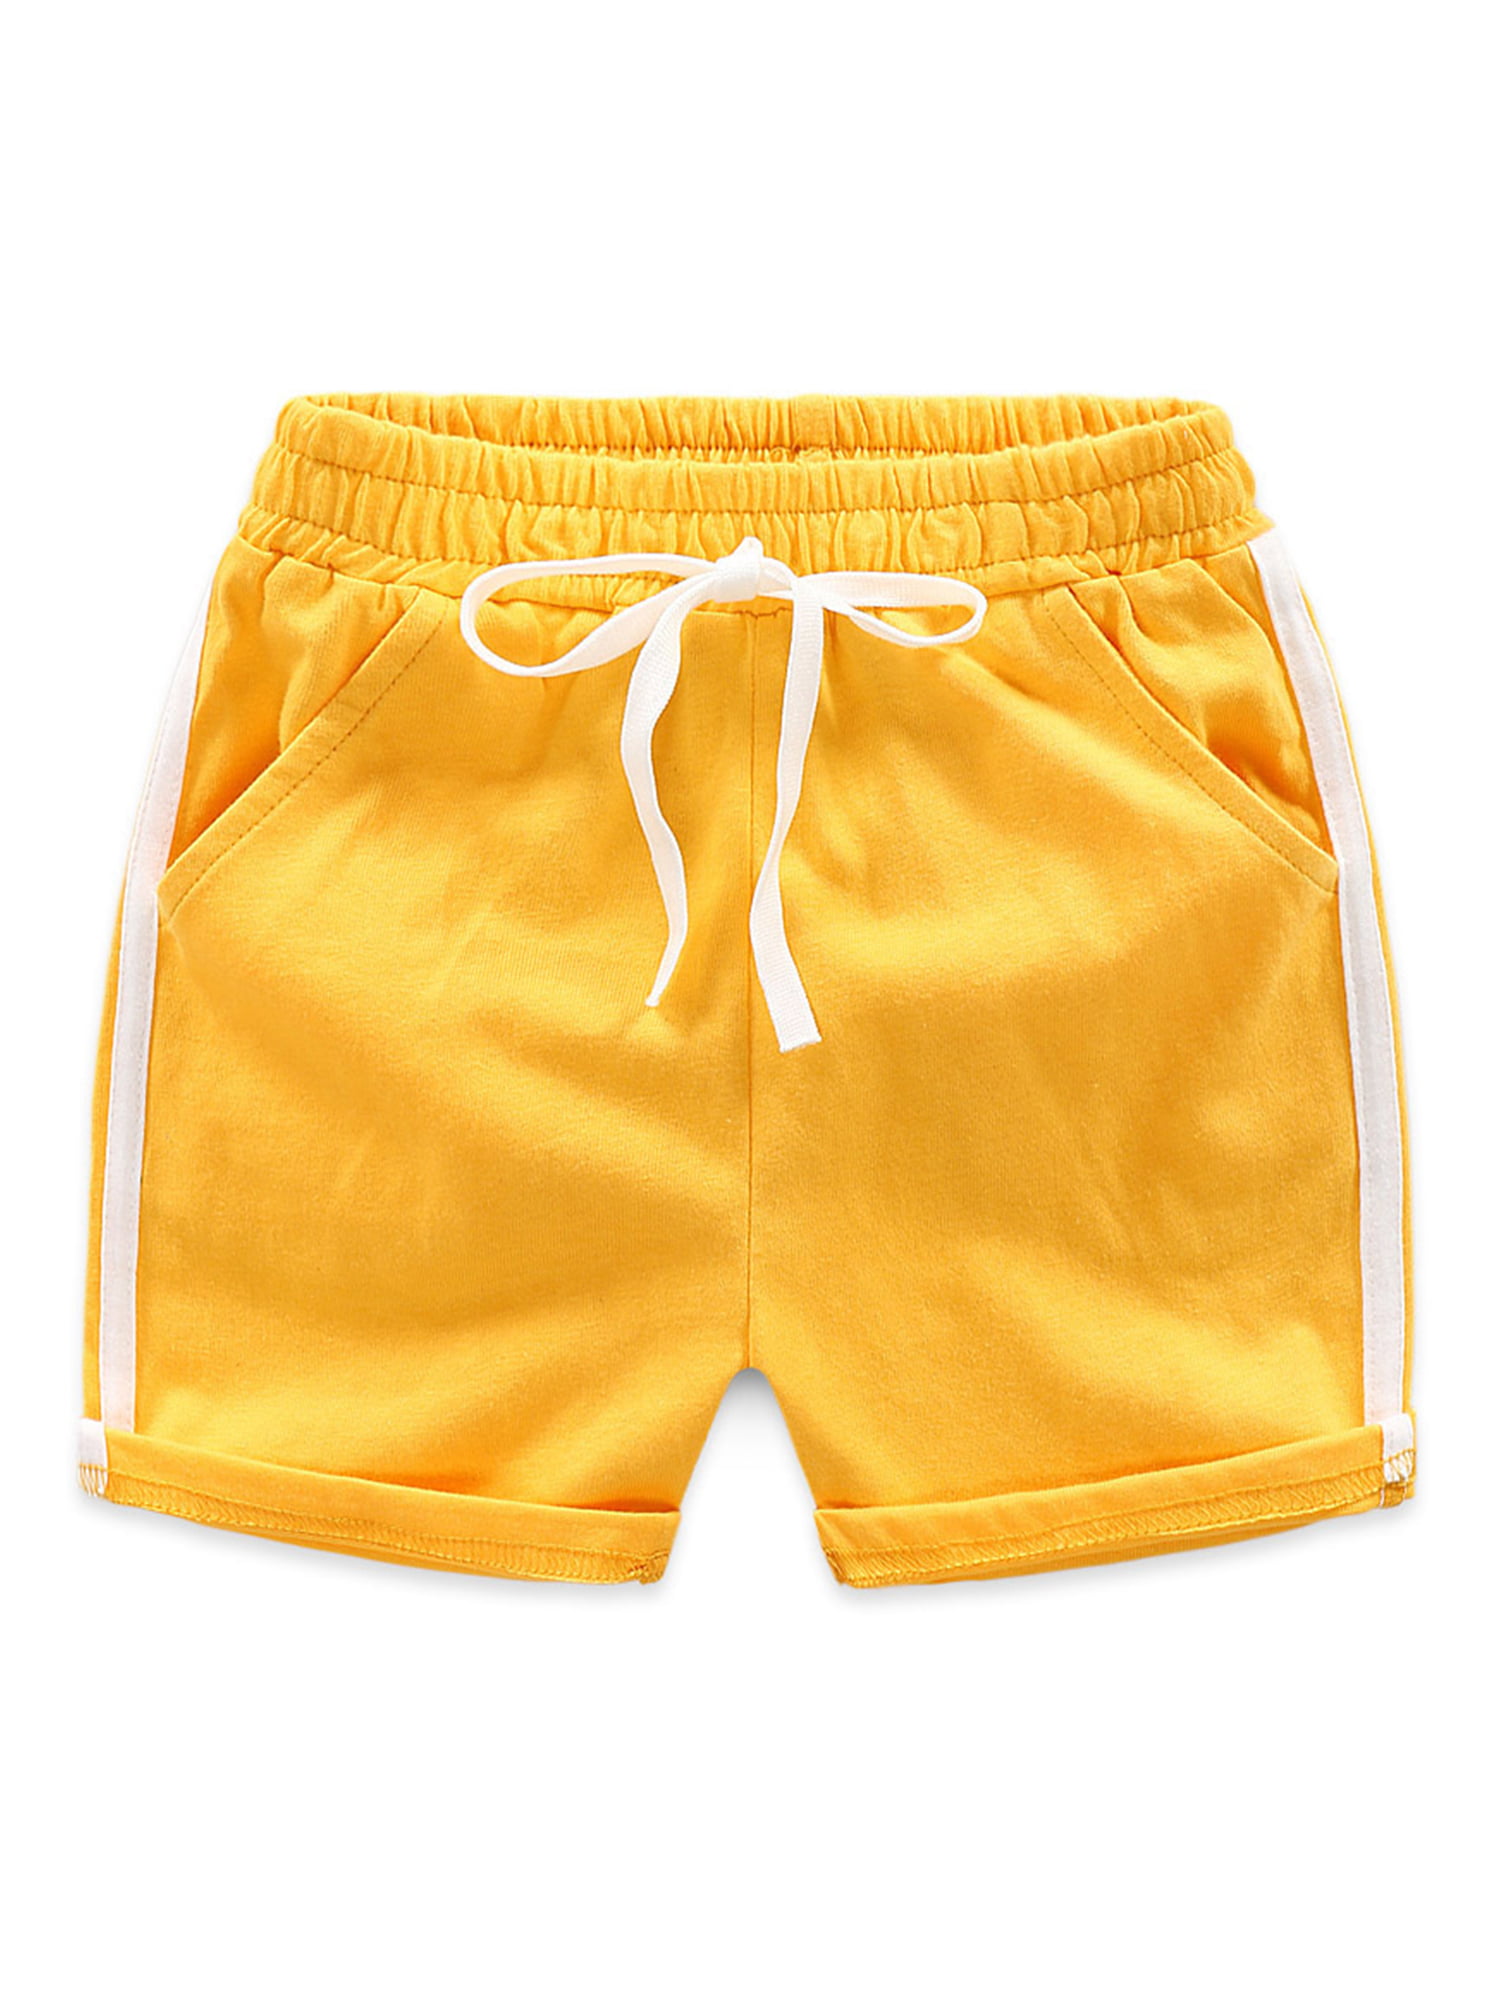 Toddler Baby Boys Shorts Pants,Elastic Waist Summer Cotton Casual Sports Active Jogger Trousers Bottoms